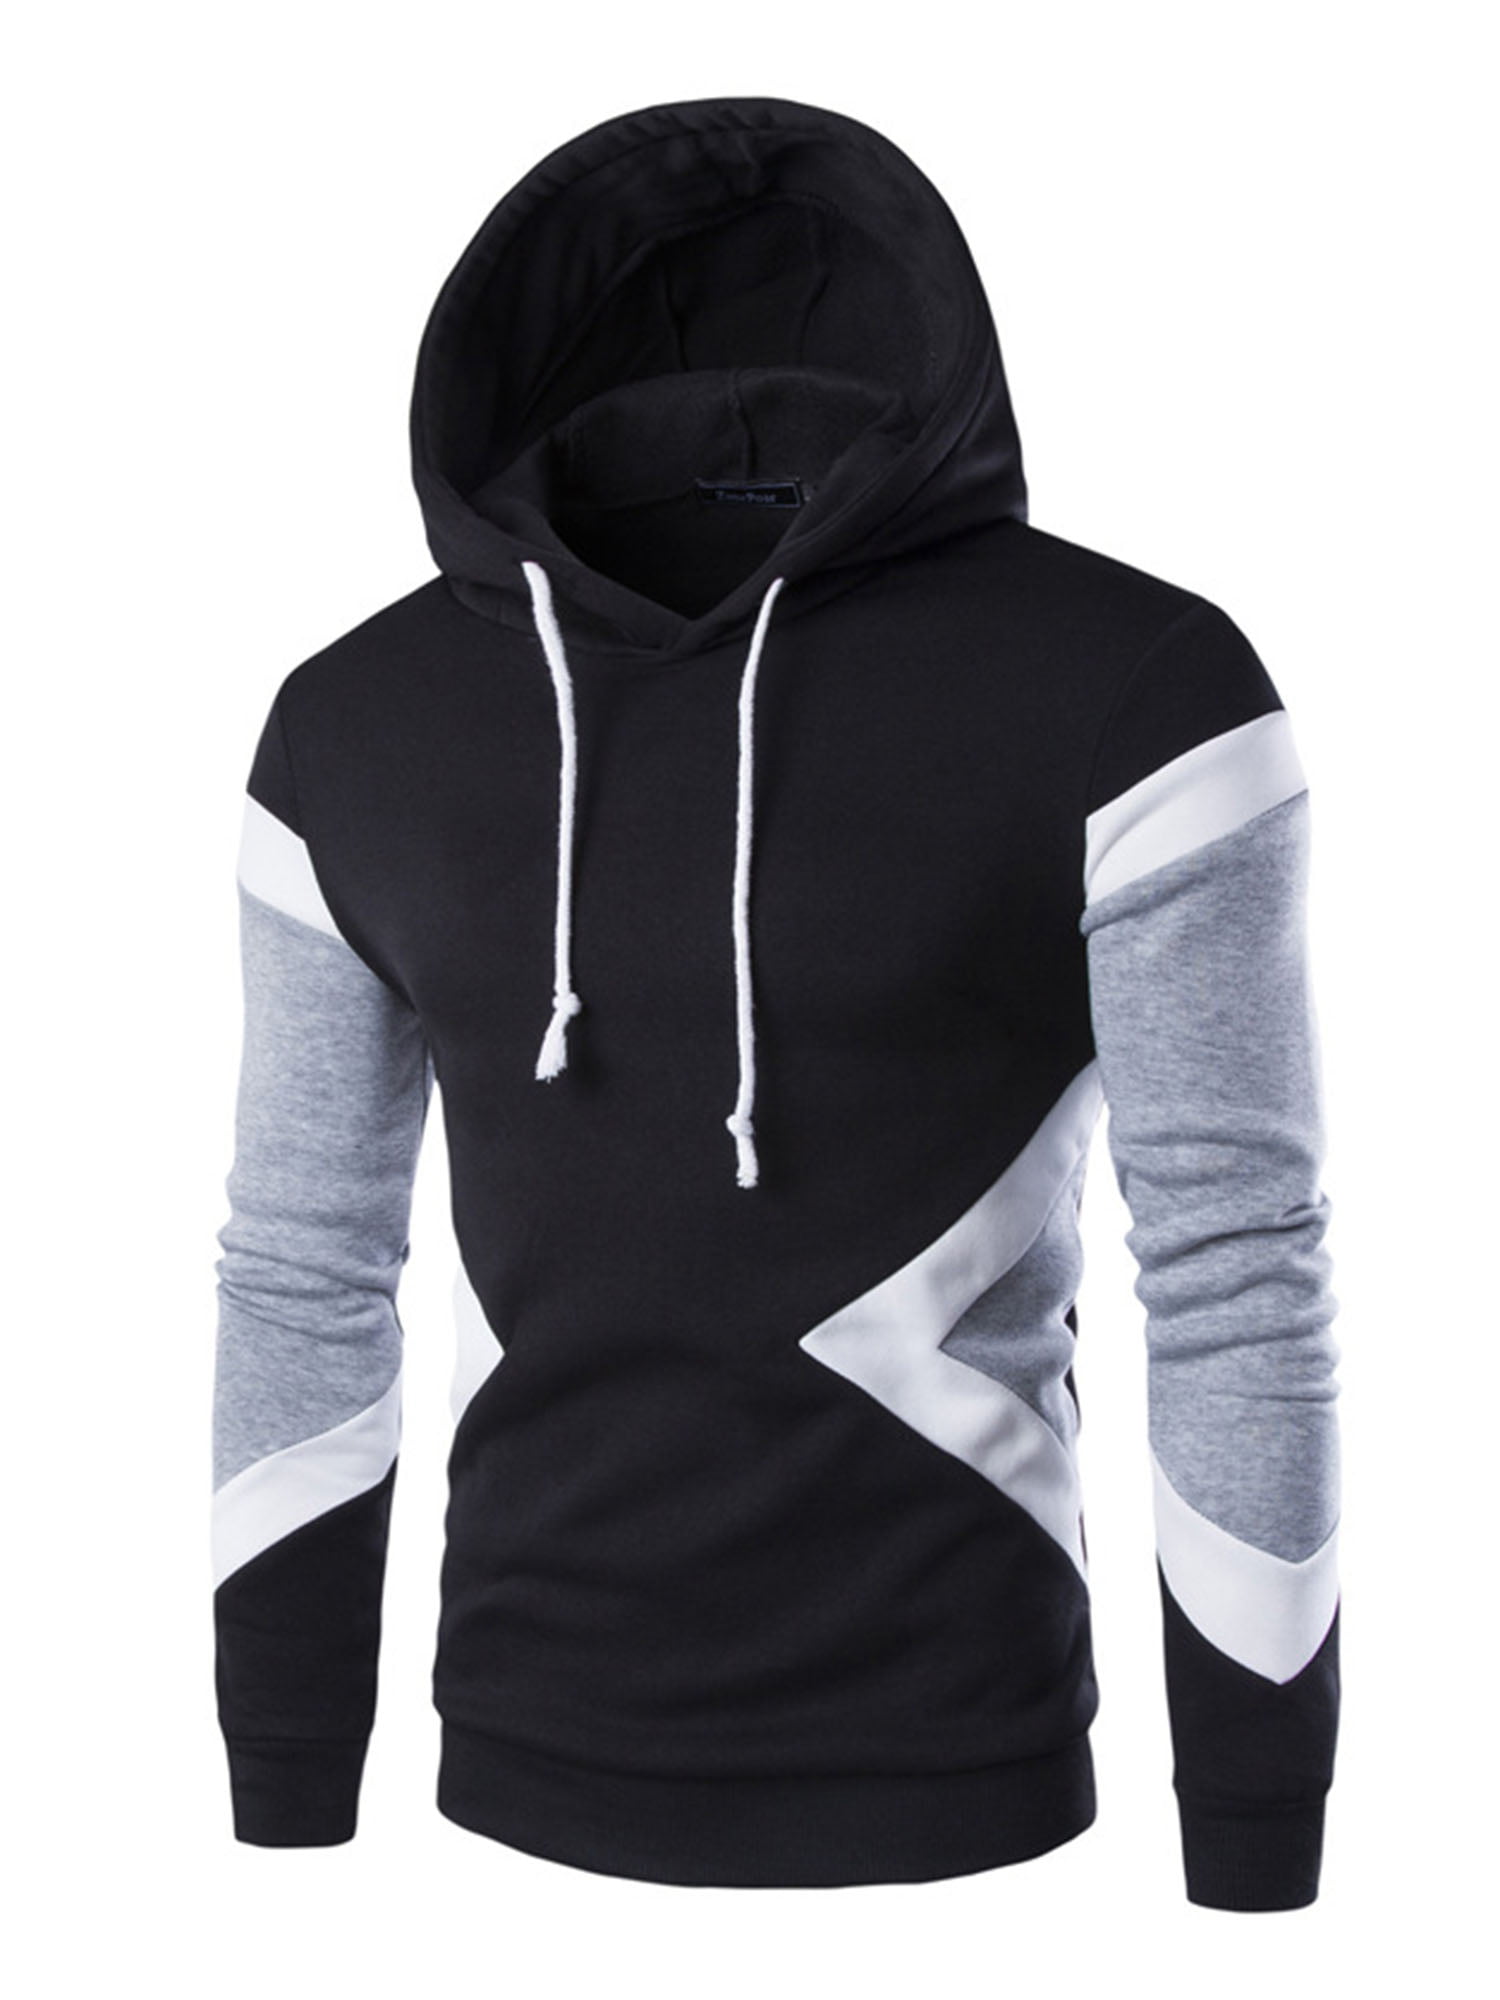 Sweatshirts for Men Pullover Long Sleeve Pullover Drawstring Patchwork Athletic Sweatshirt Gym Hooded Tops